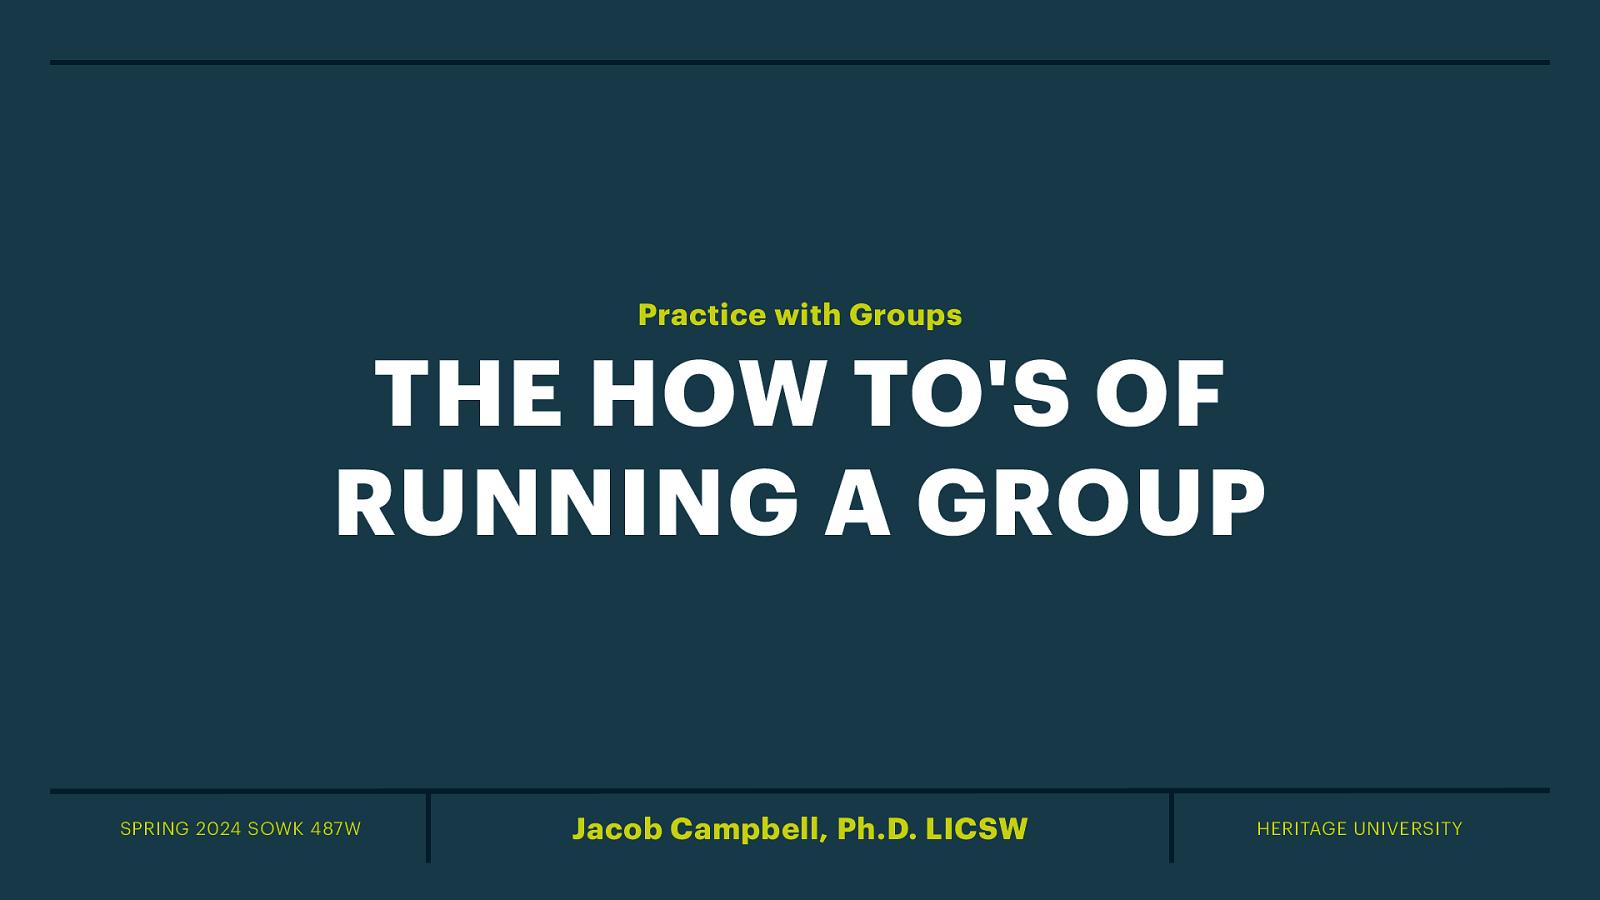 Spring 2024 SOWK 487w Week 13: The How To’s of Running a Group